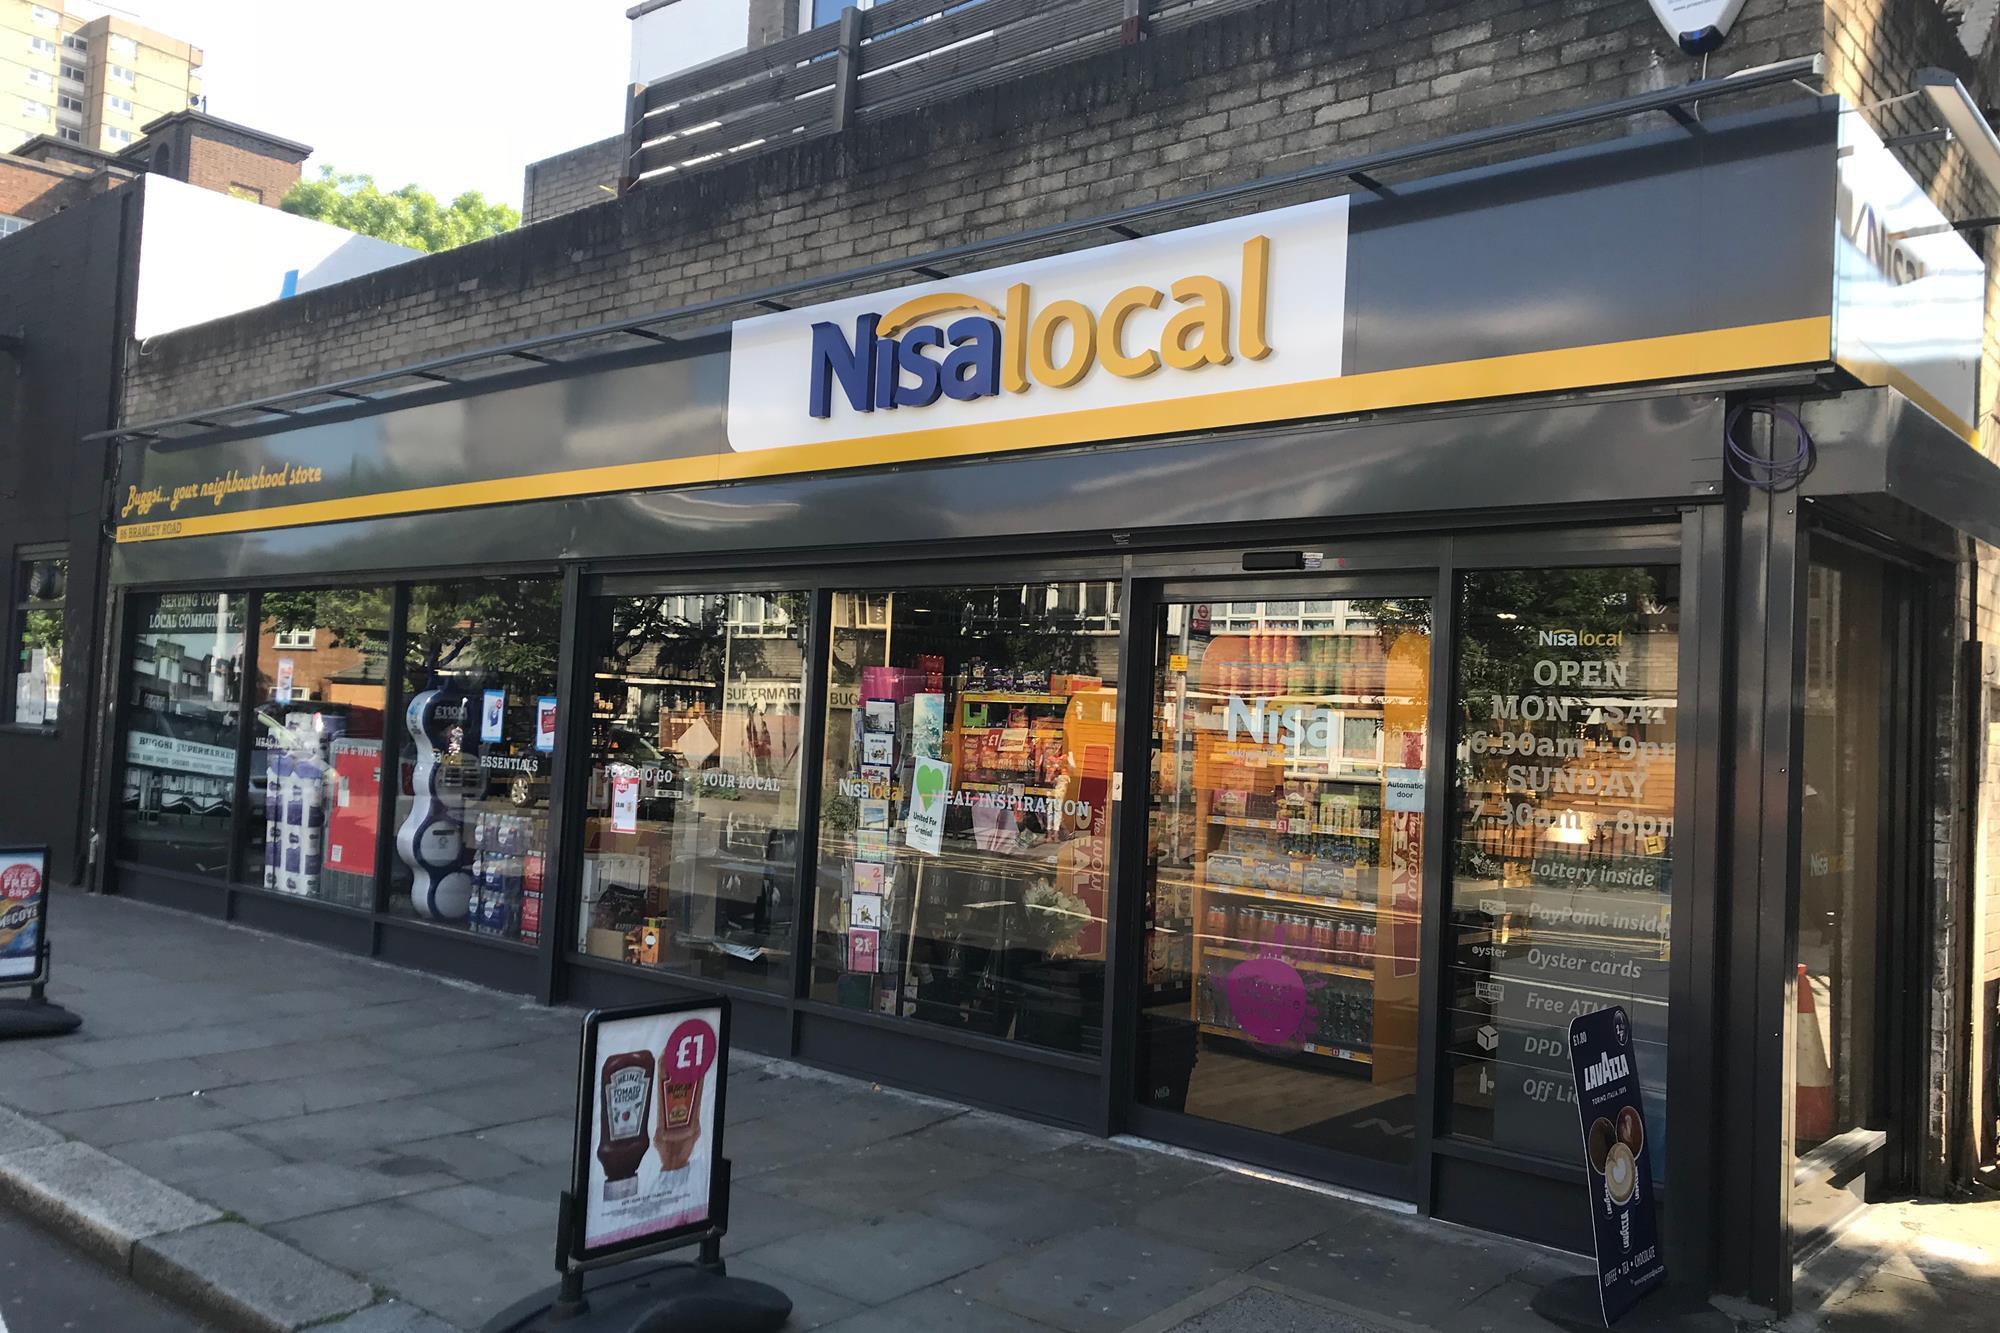 Nisa recruits 242 new stores in first half of 2020 | News | The Grocer